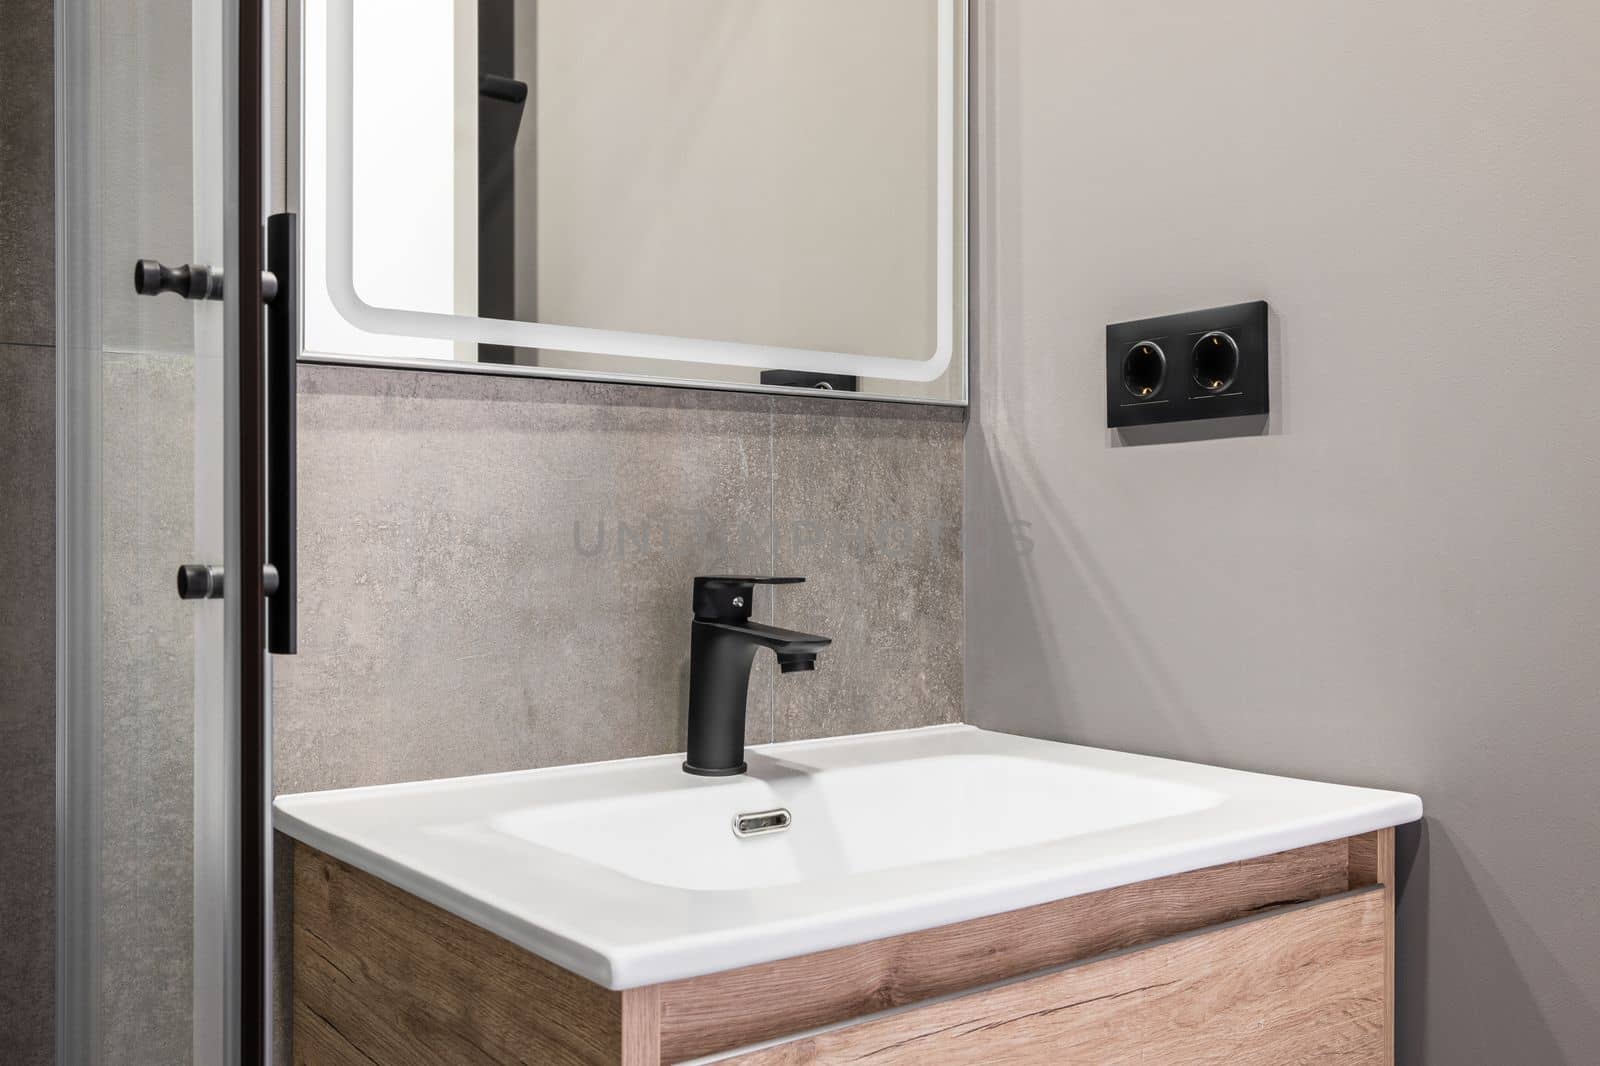 Closeup of a white square ceramic sink on a wooden vanity. Fittings and faucet made of ferrous metal. On the wall is a designer mirror with a white frame. Walls in gray pleasant tones. by apavlin